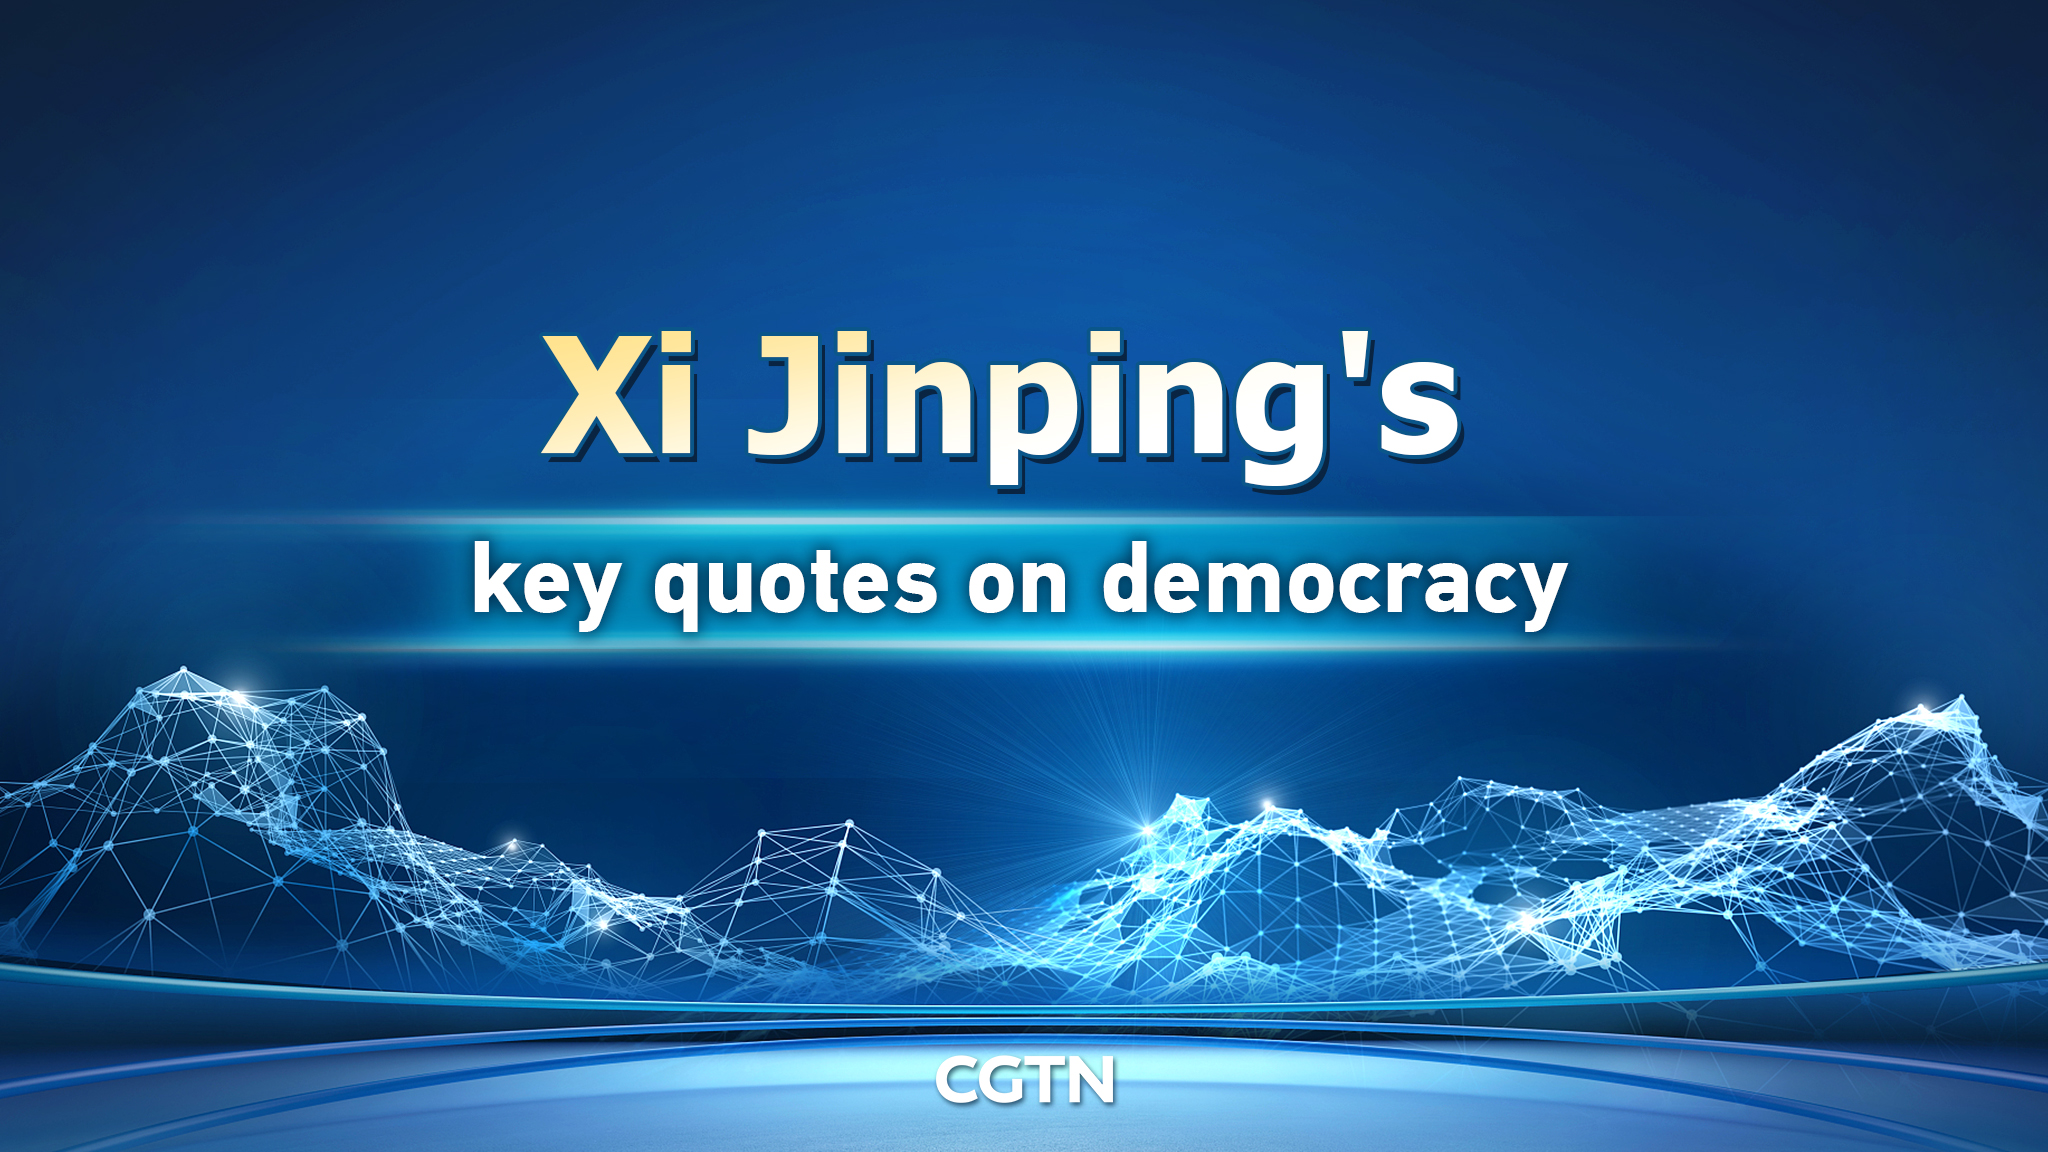 Xi Jinping's key quotes on democracy